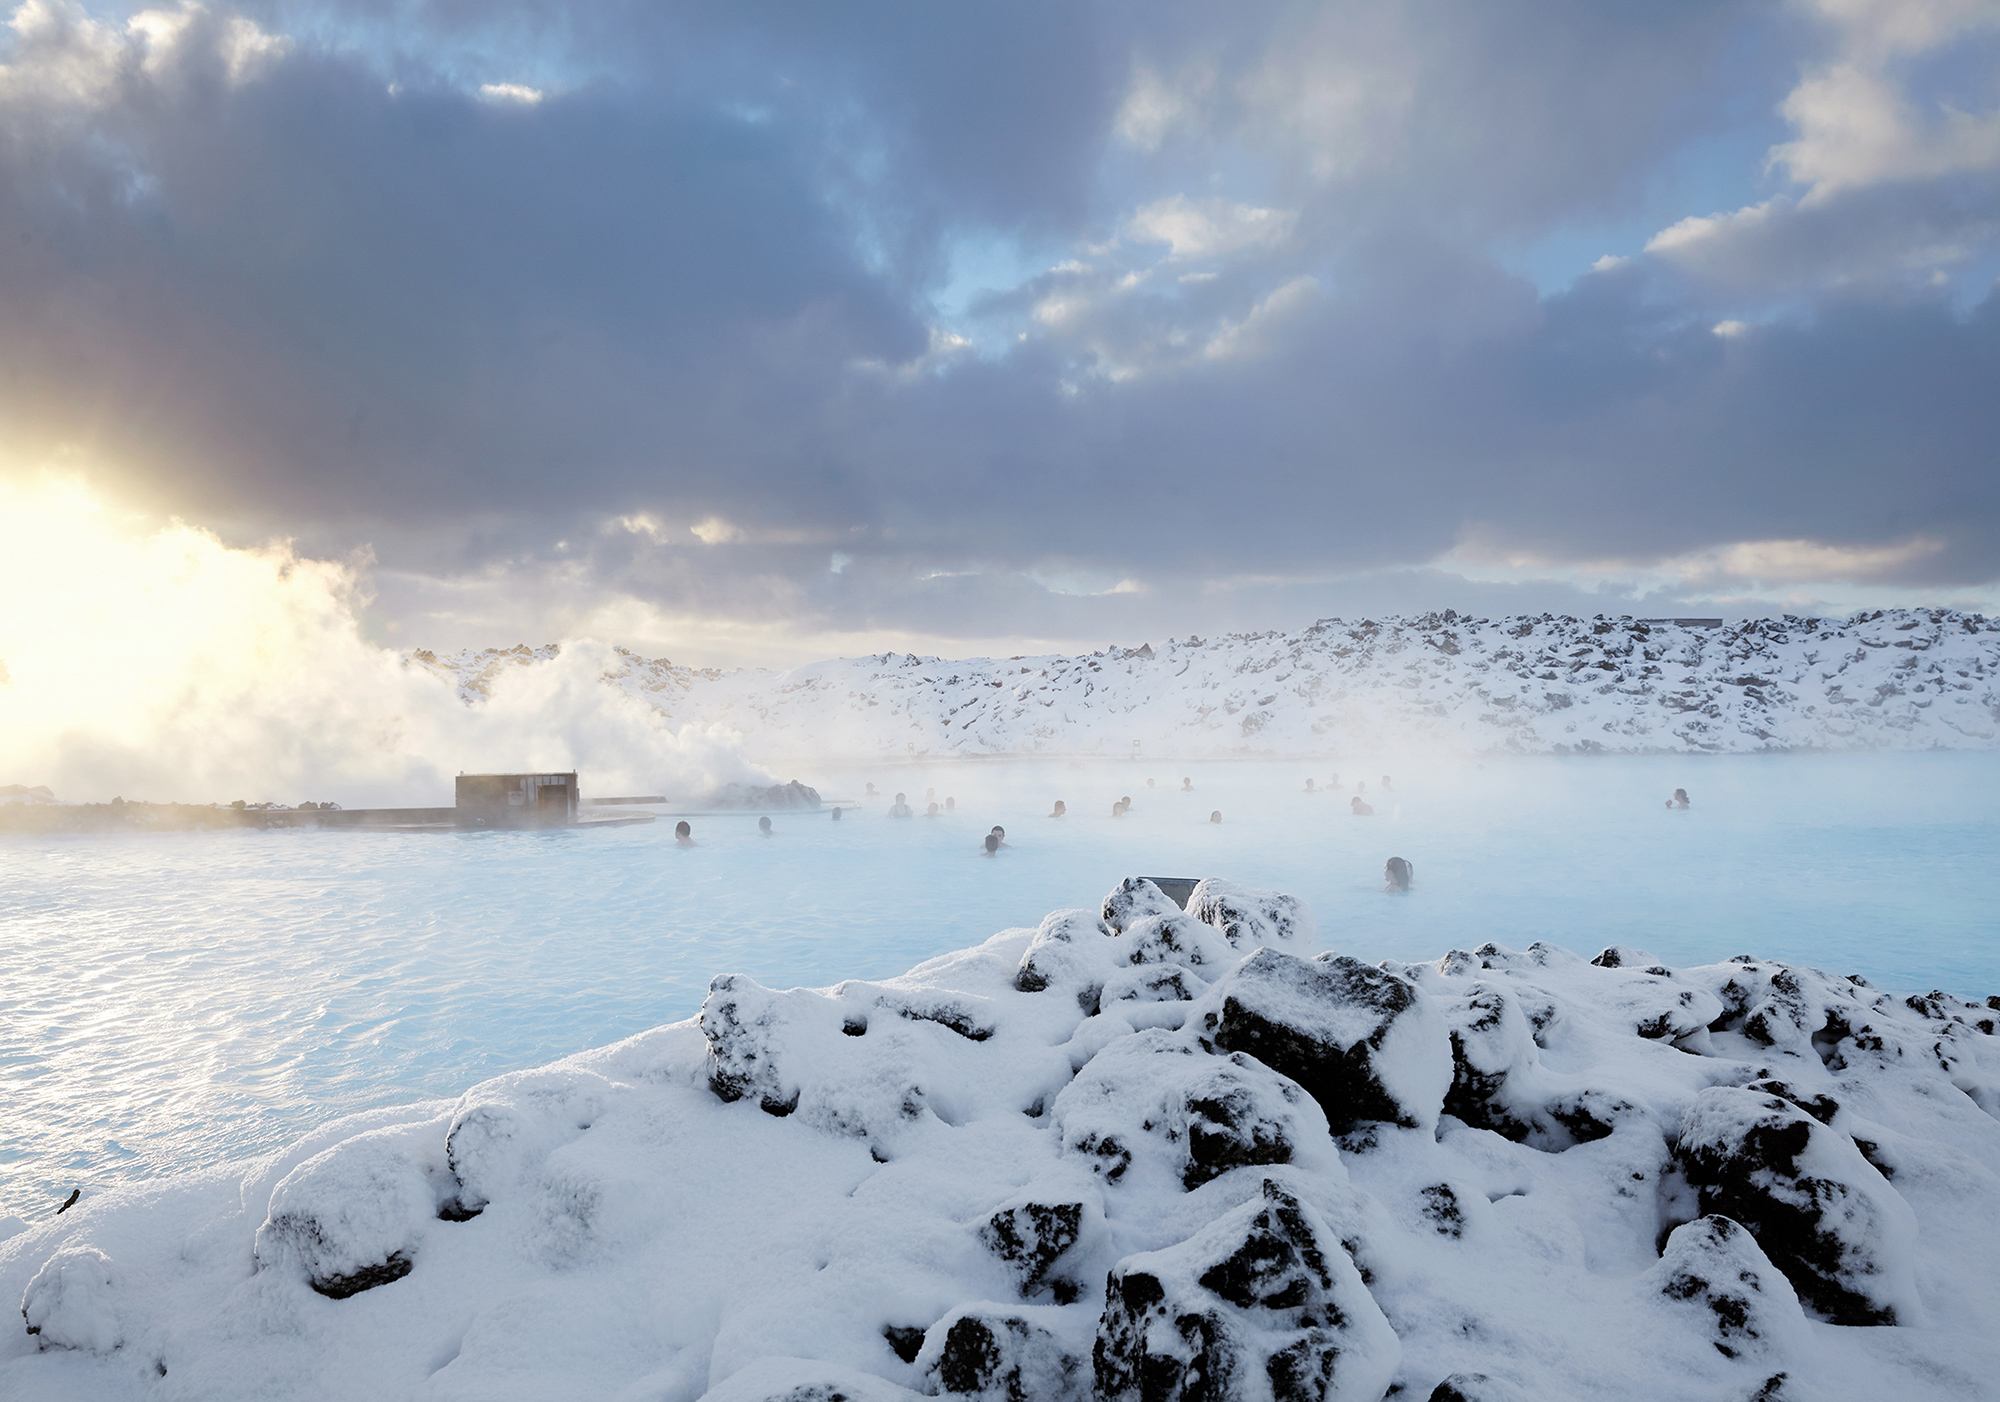 The warm waters of the Blue Lagoon make it a perfect place to warm up in winter.